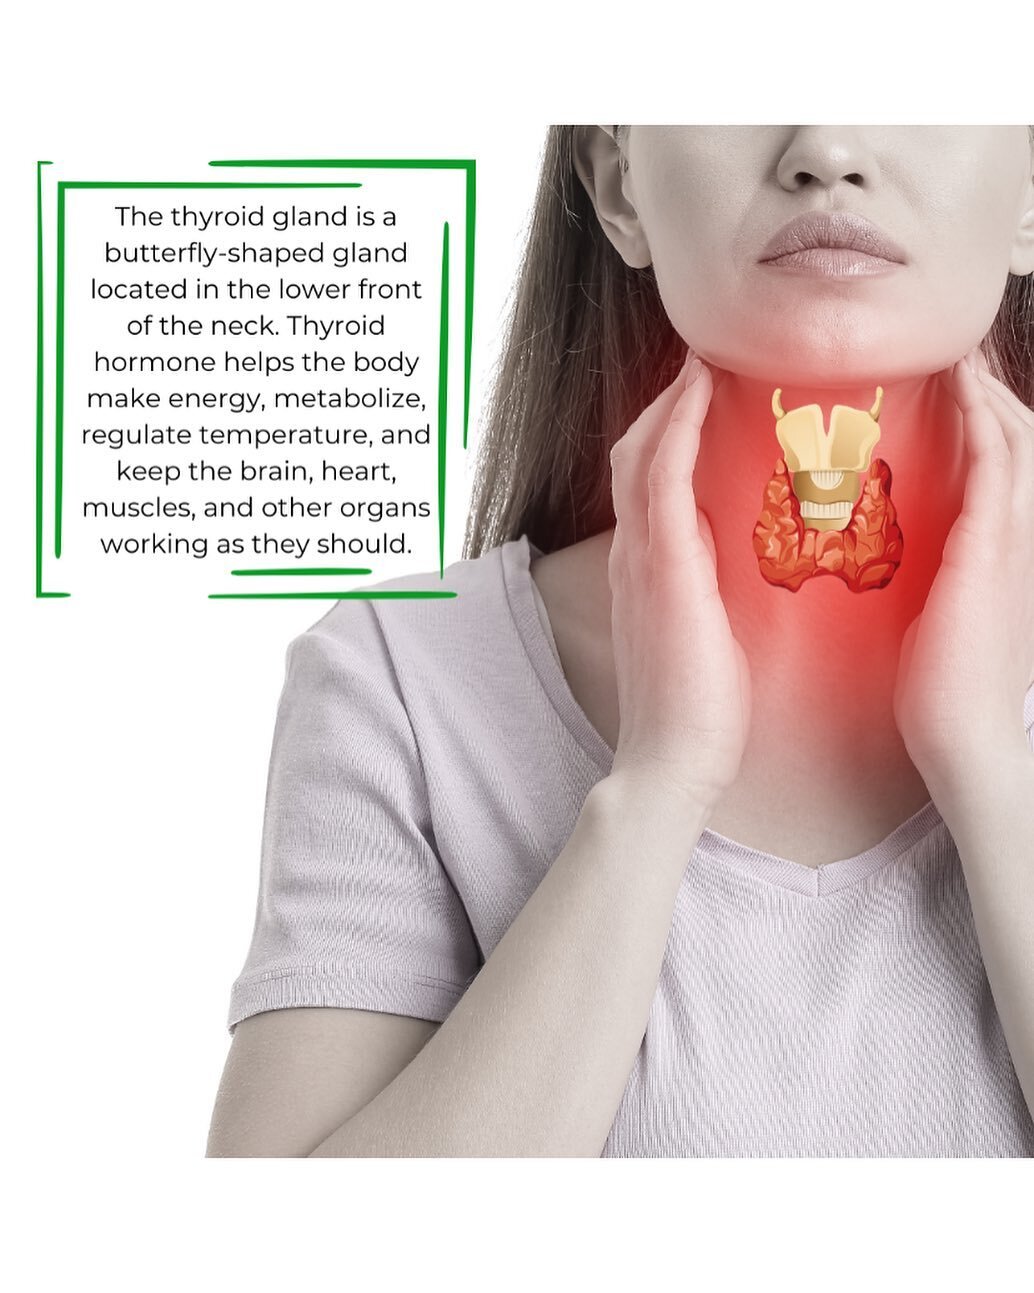 It&rsquo;s thyroid health month! Show your thyroid some love by eating mineral rich foods. 🍤 Shellfish and other seafood are good sources of selenium copper and manganese. Essential for thyroid hormone production. 🥗 Take it easy on the kale salads.